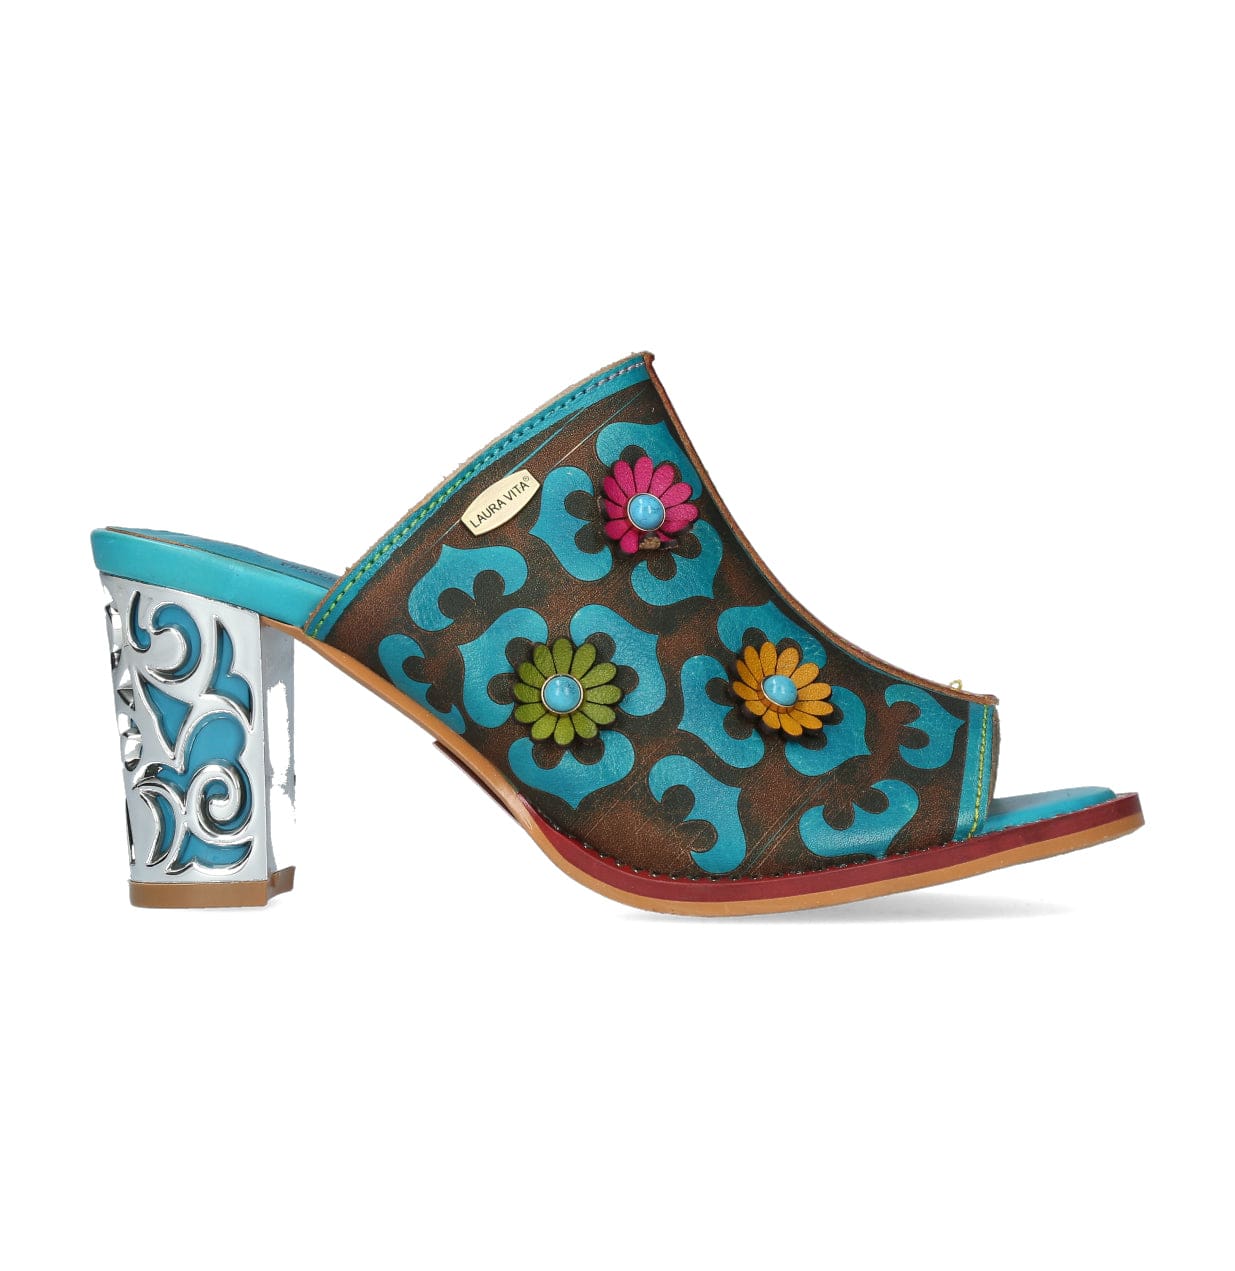 Chaussures LEDAO 03 - 35 / Turquoise - Mule